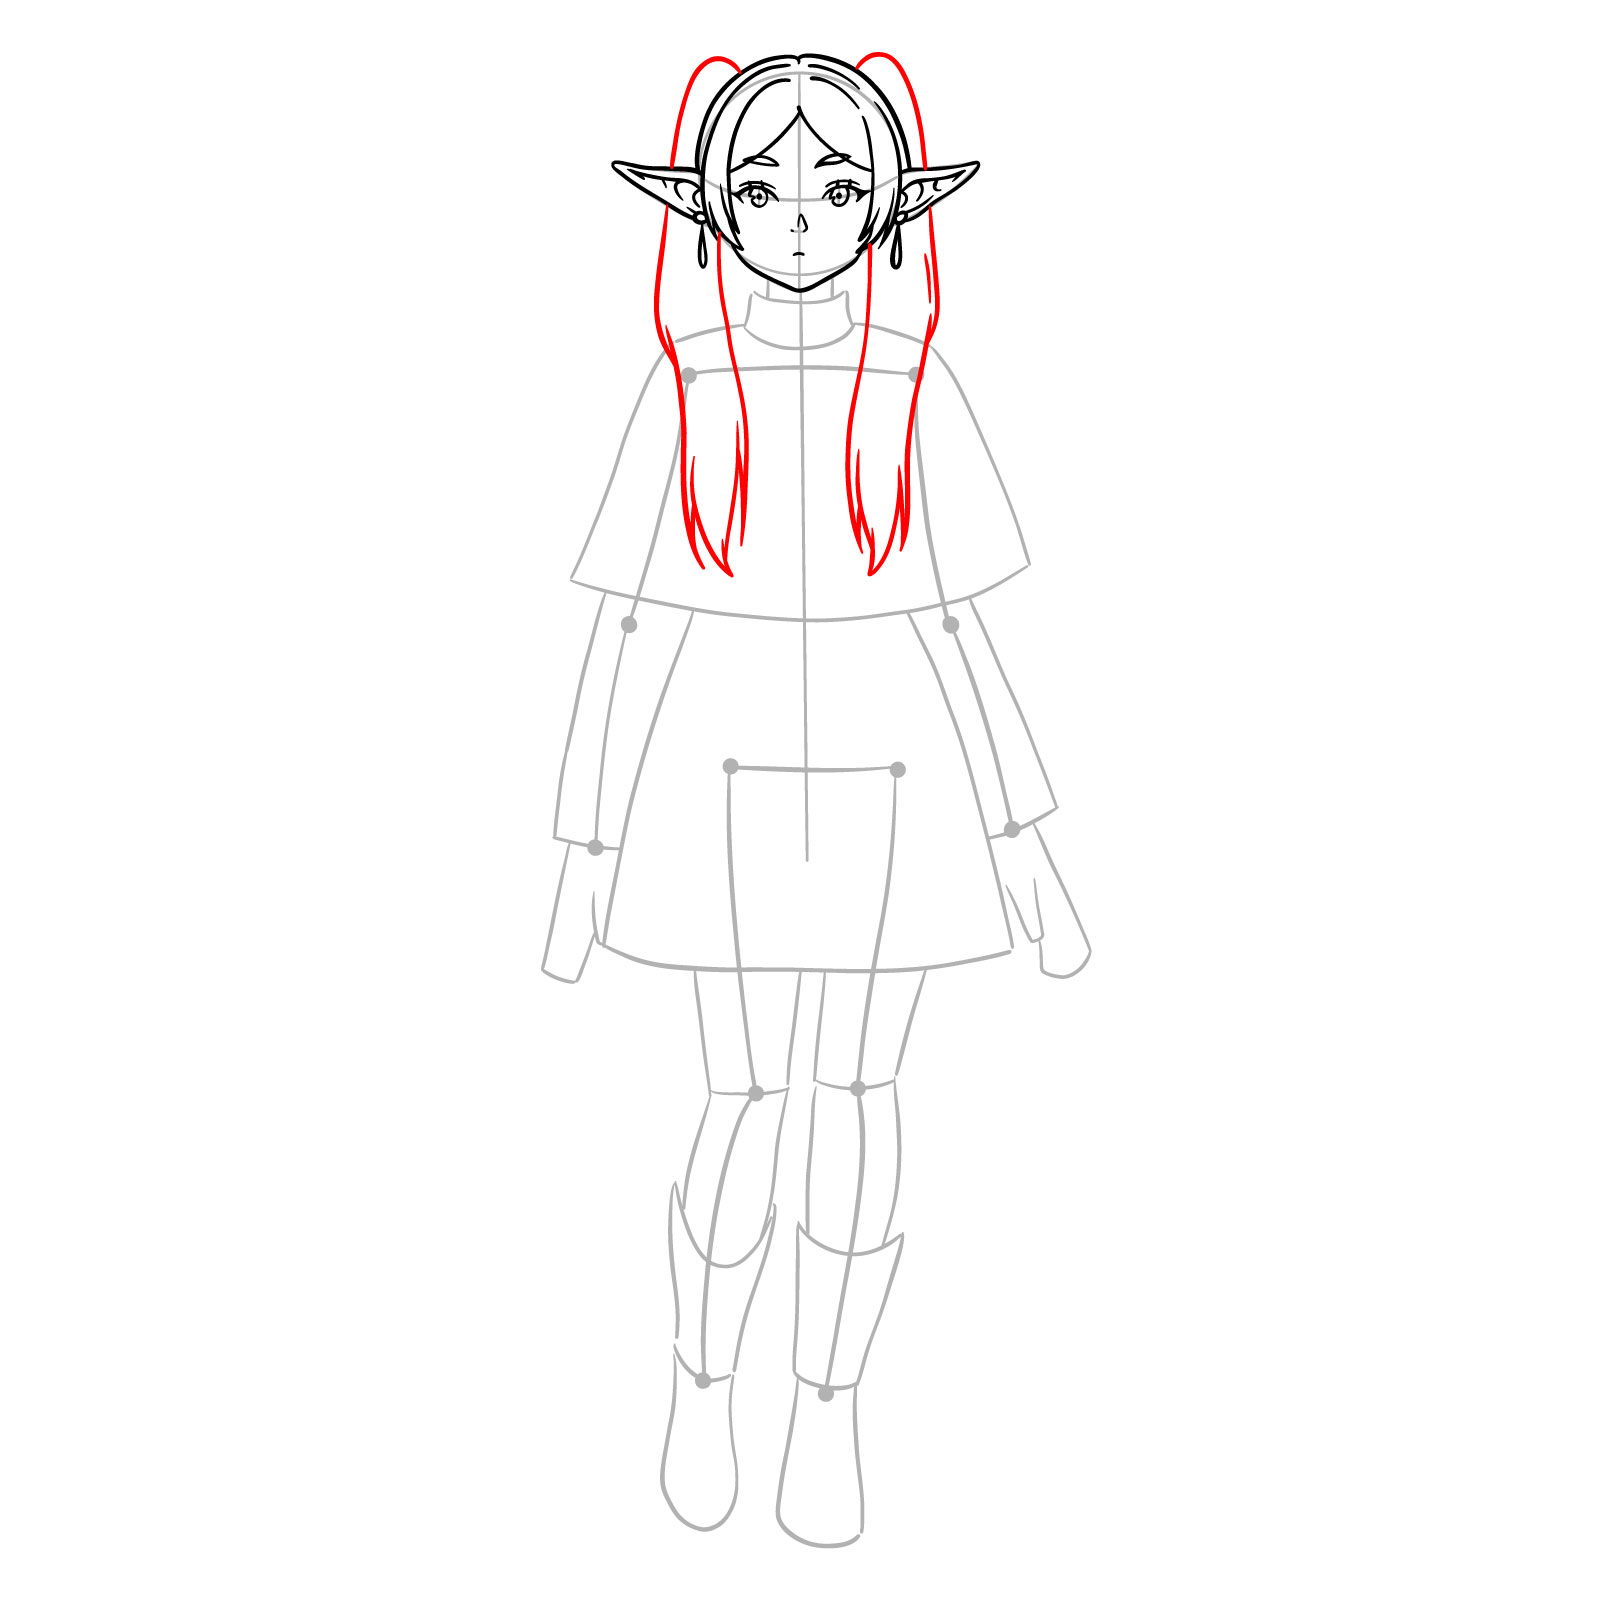 Pigtails added in Frieren's full body drawing - step 10